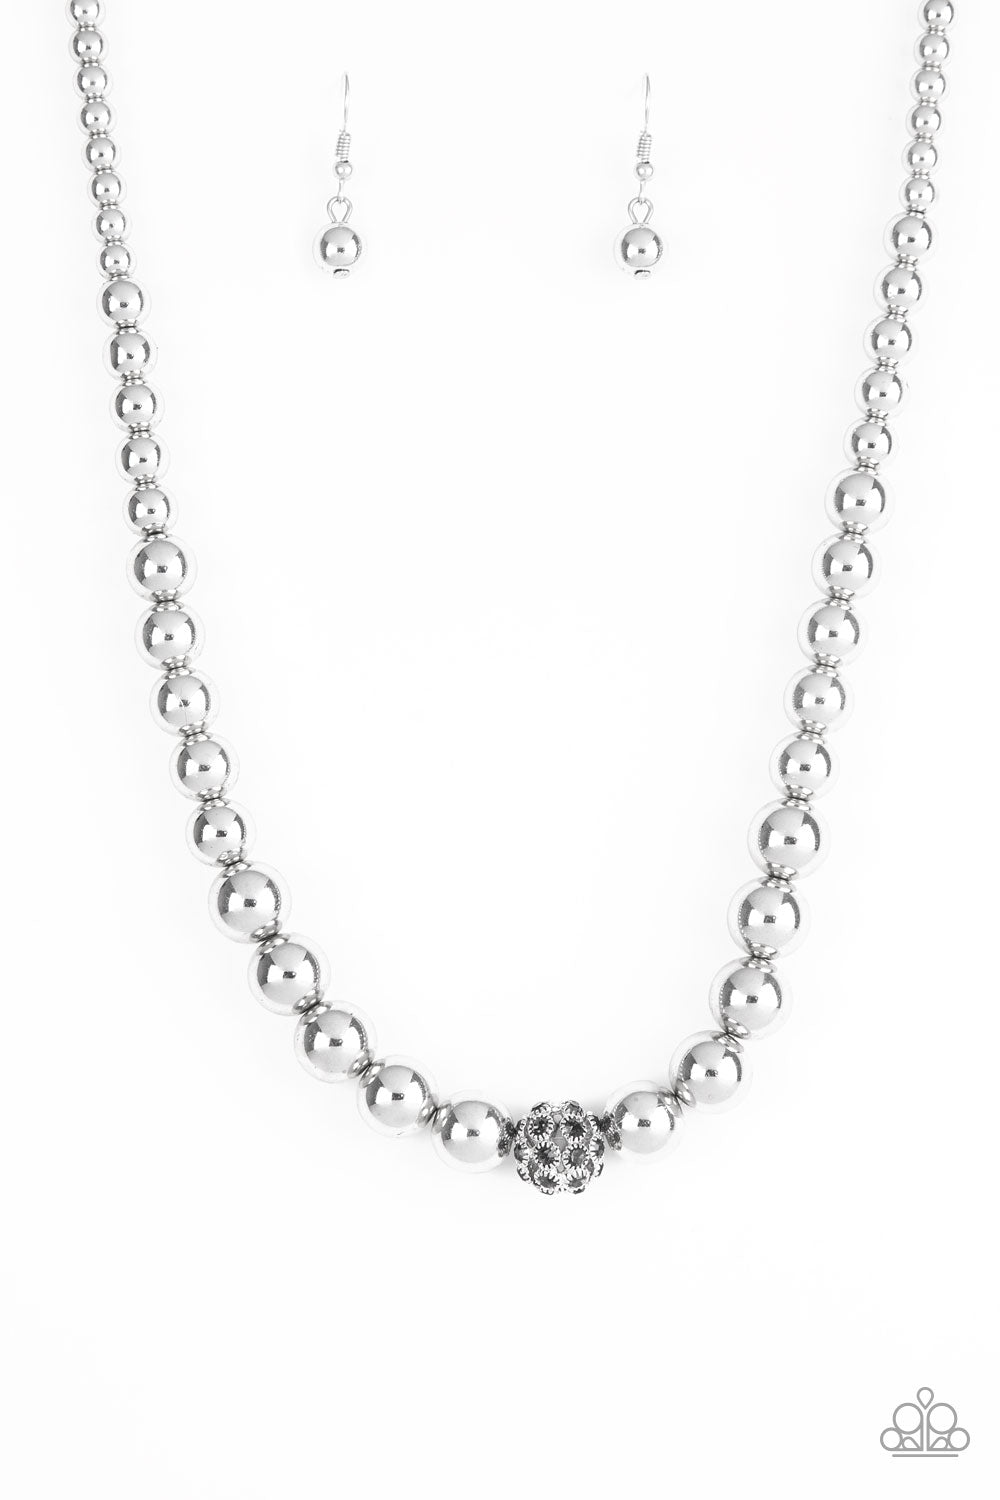 Paparazzi High-Stakes Fame Silver Short Necklace